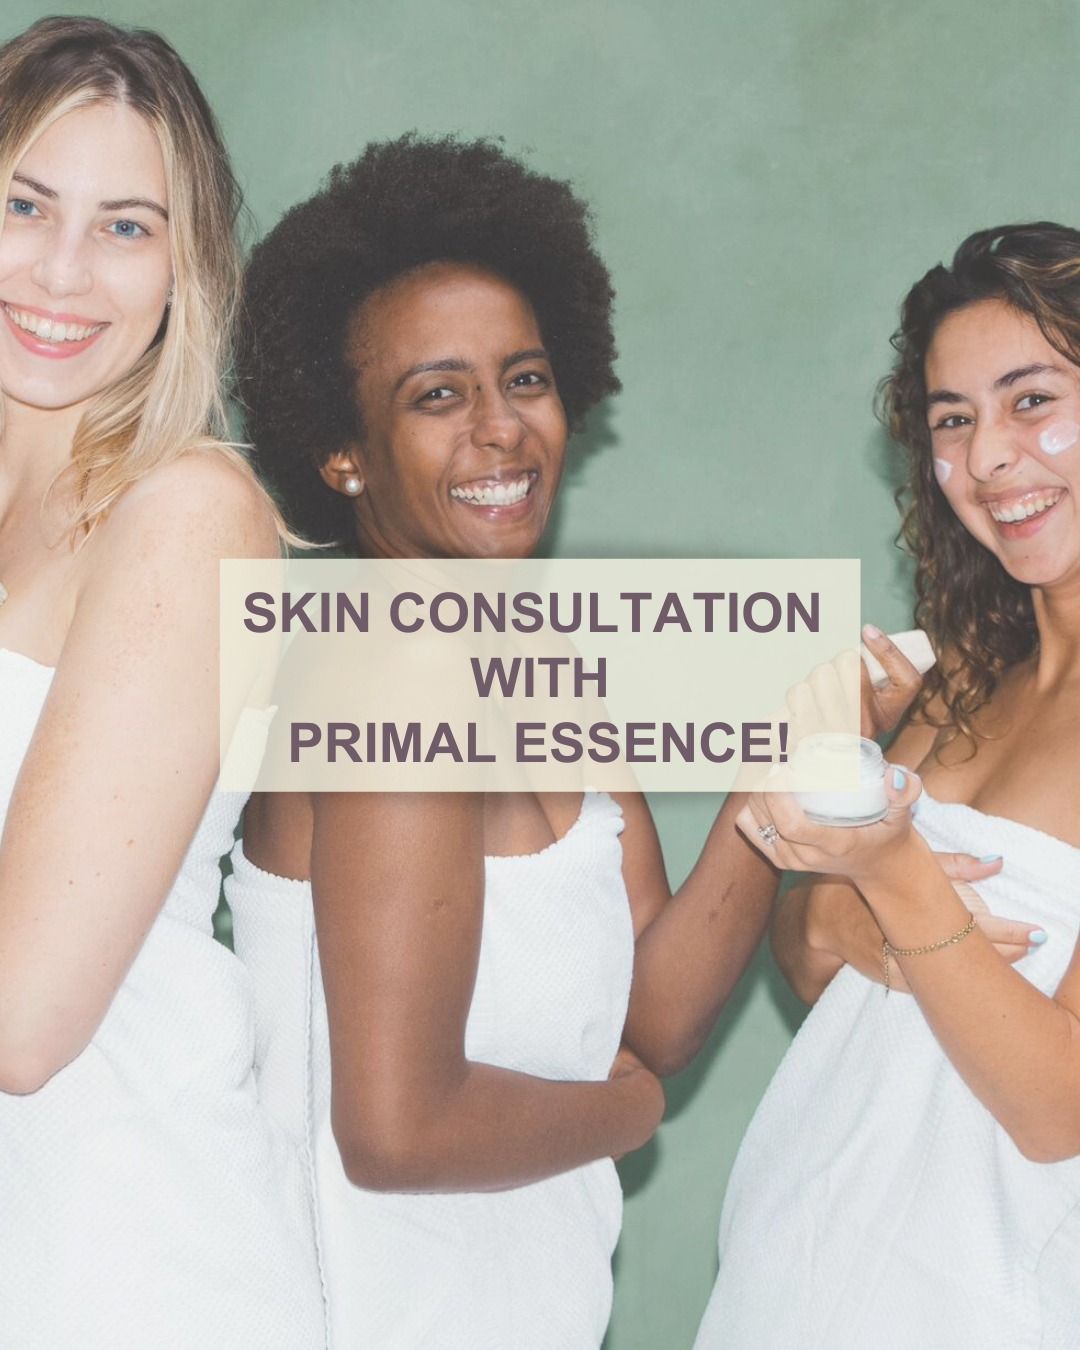 Skin consultation with Primal Essence